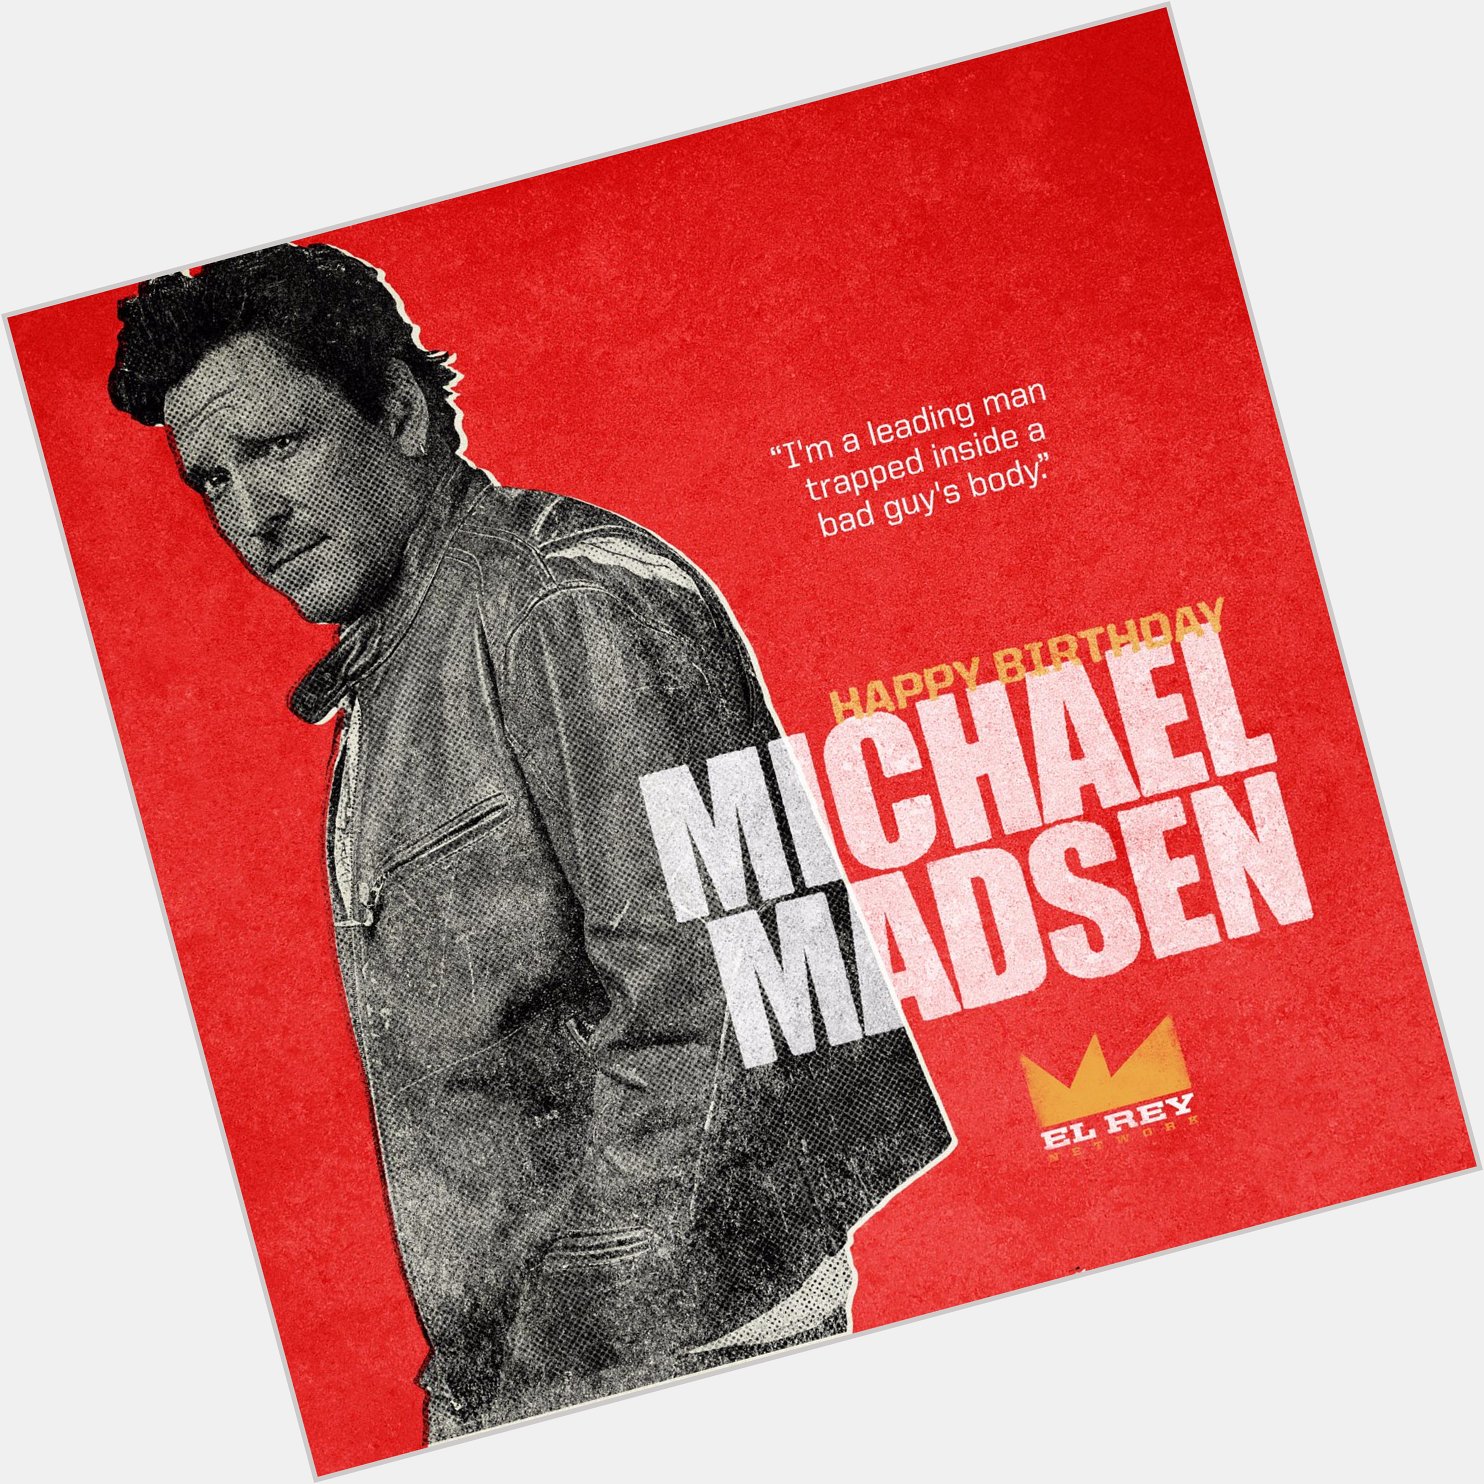 Happy Birthday to himself - our friend, Michael Madsen! 